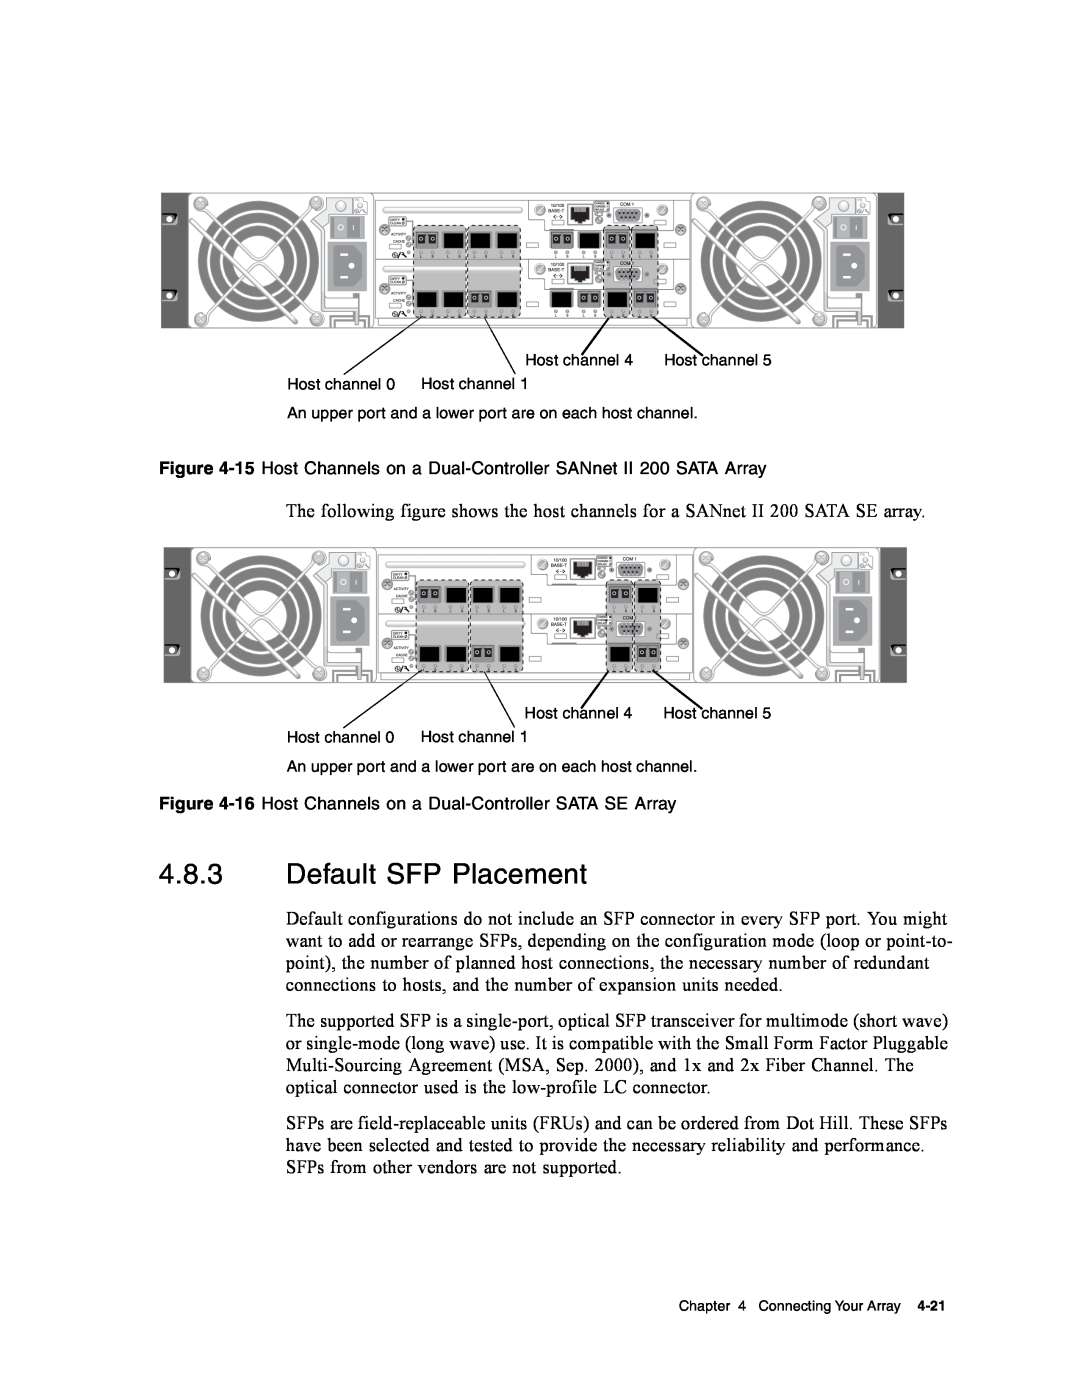 Dot Hill Systems II 200 FC service manual Default SFP Placement, 16 Host Channels on a Dual-Controller SATA SE Array 